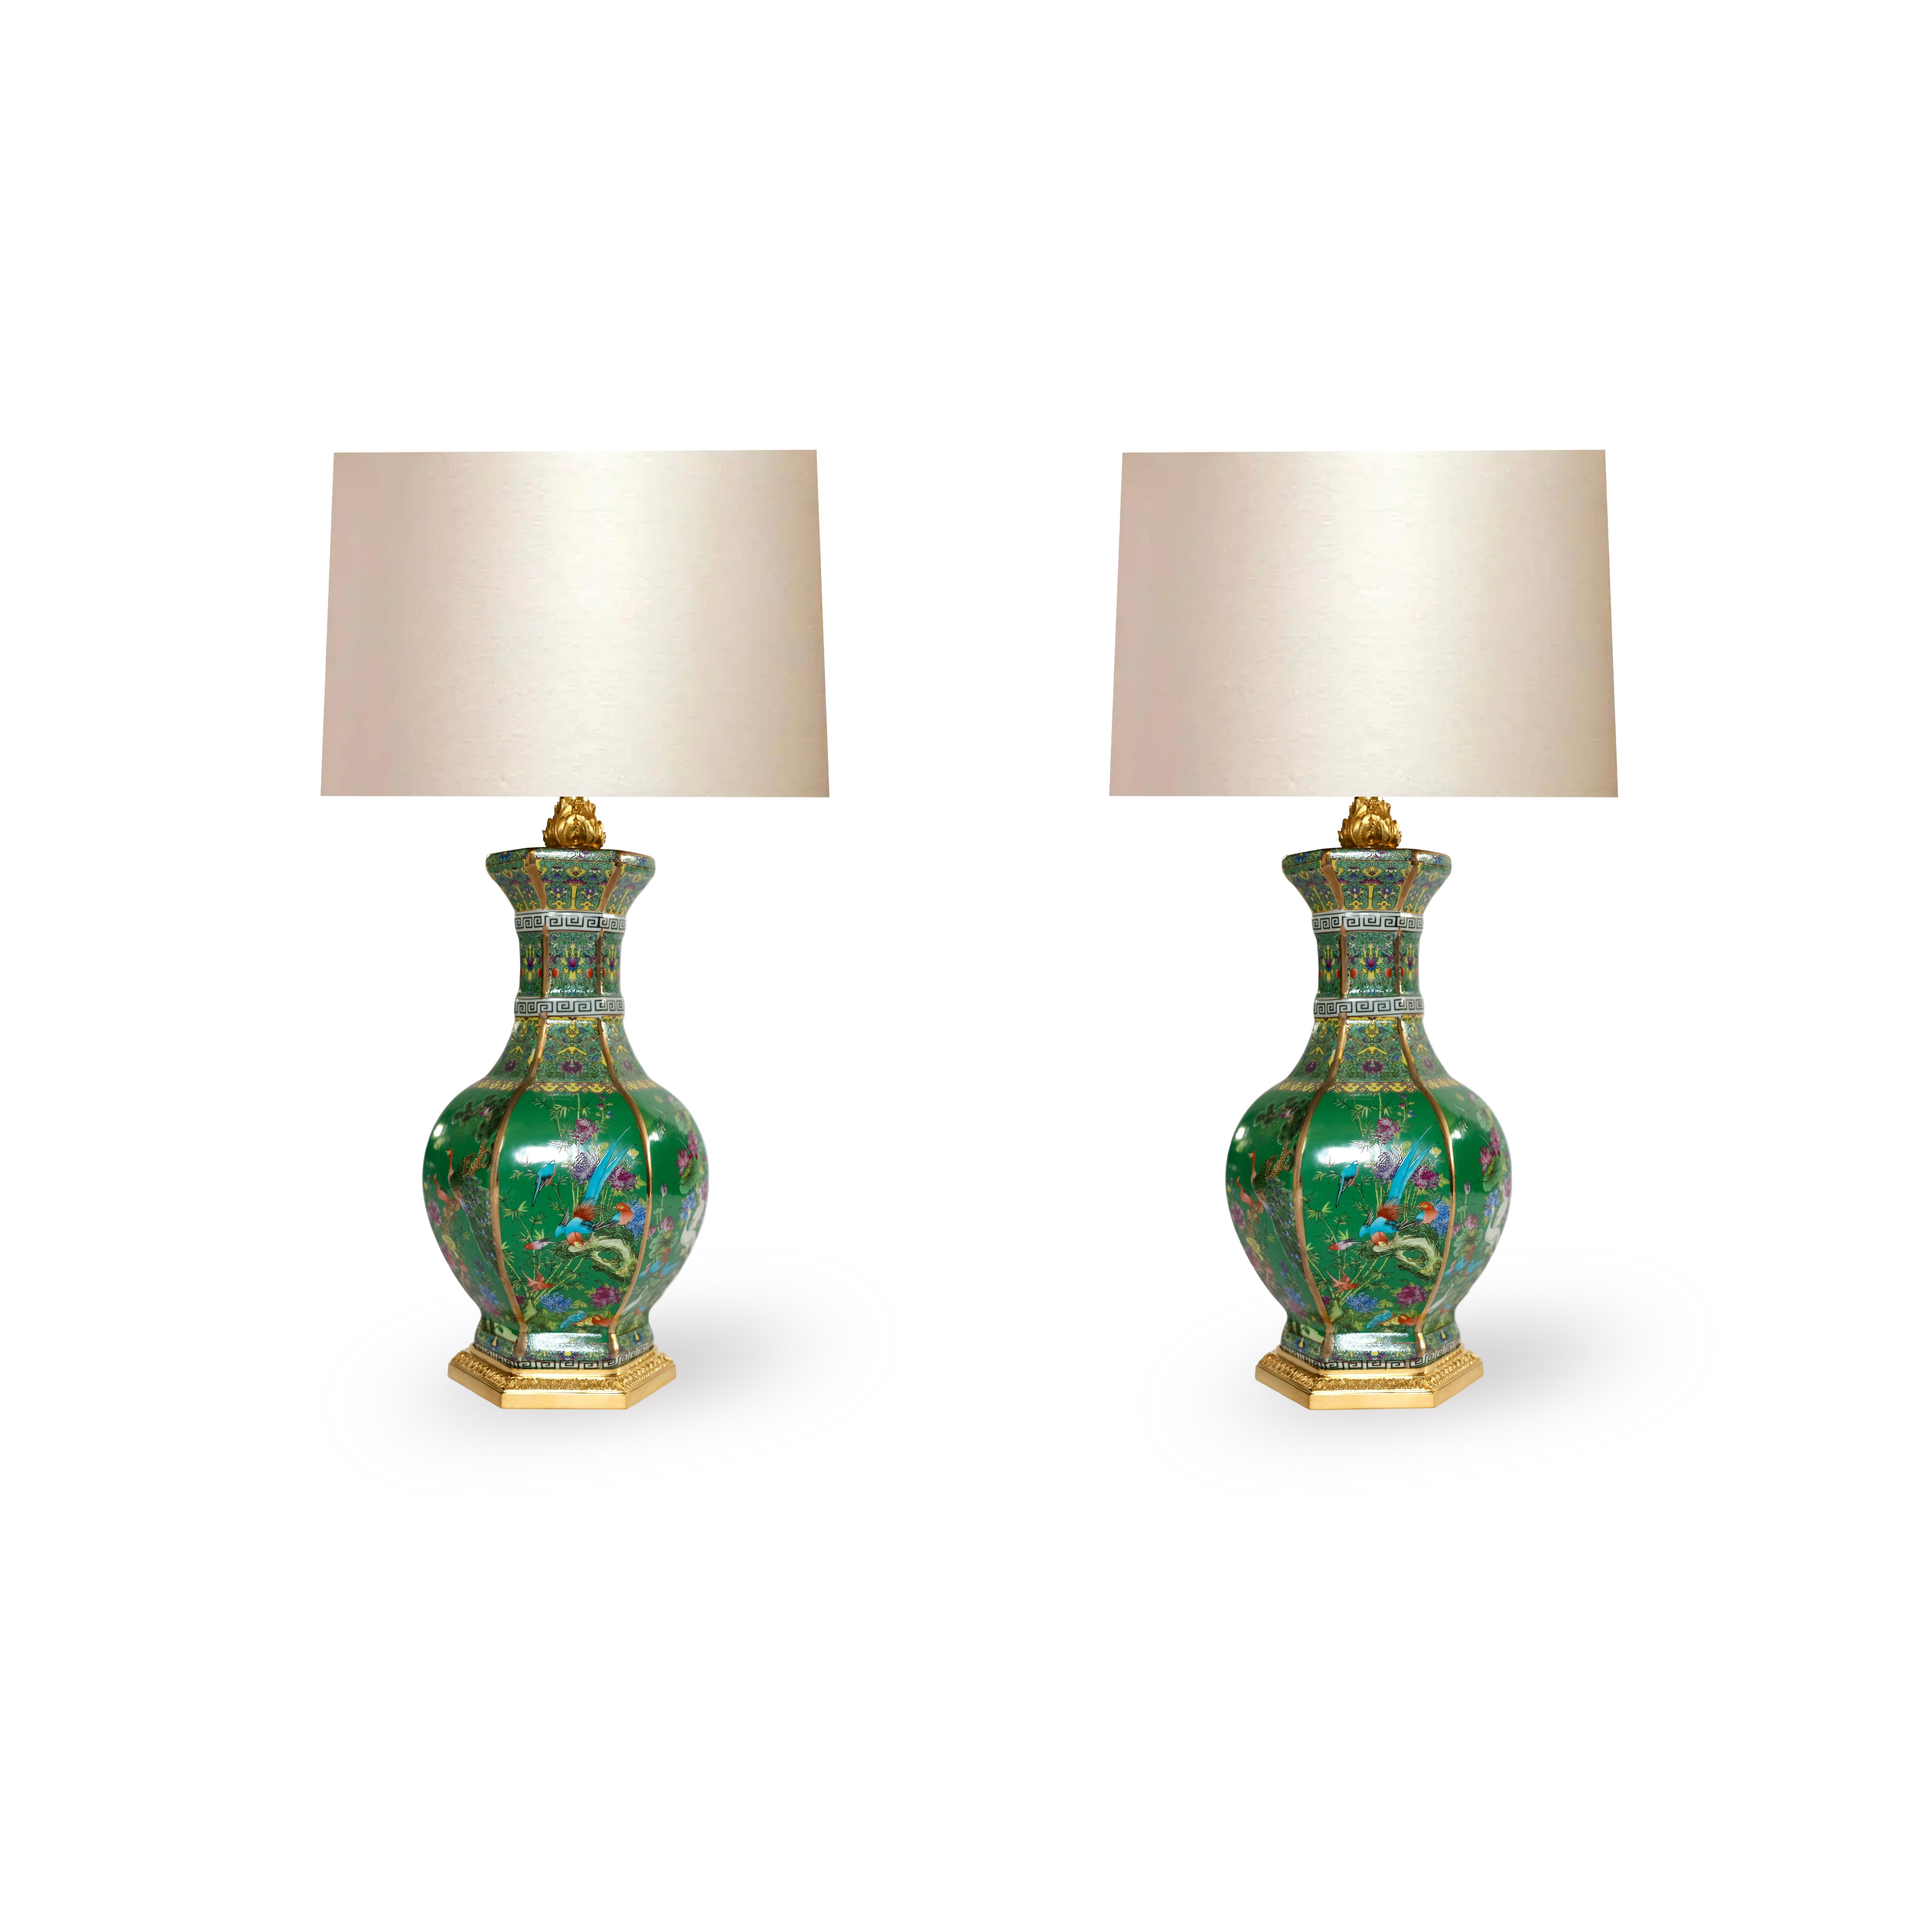 Pair of ormolu mount famille verte porcelain lamps, Each lamp installed two E26 sockets. To the top of the porcelain 21 inch,lamp shade are not included.